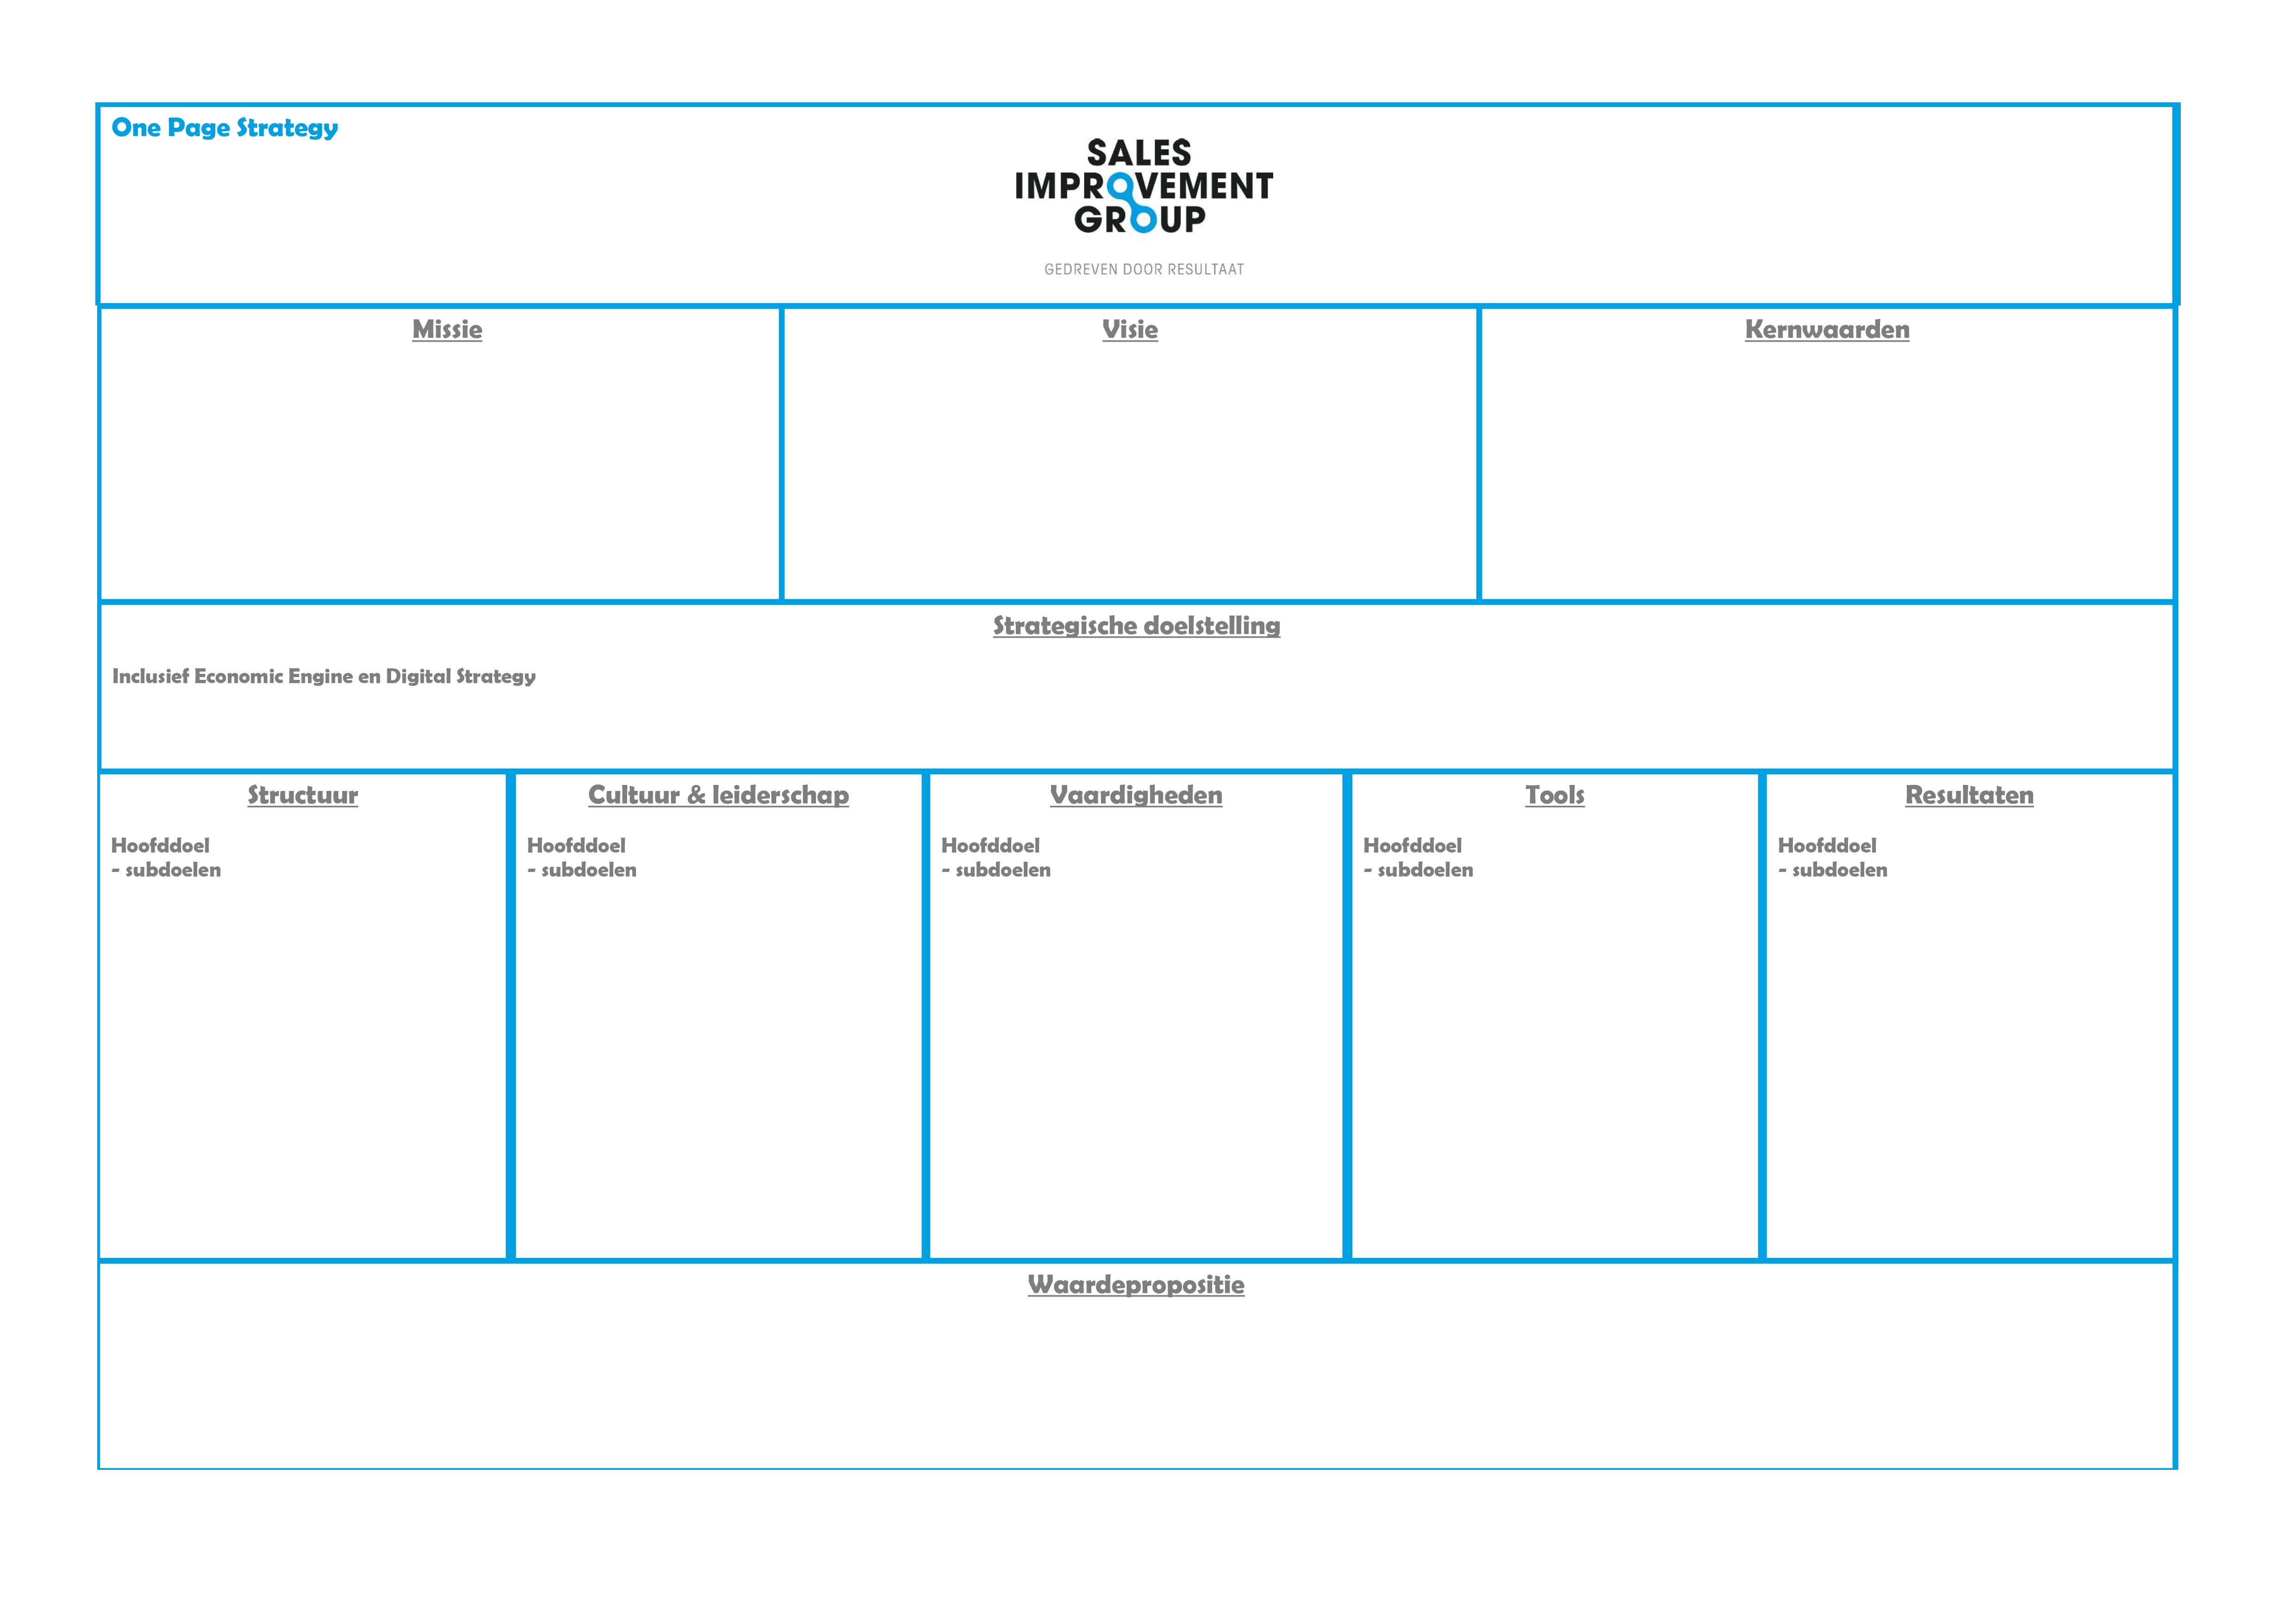 One page strategy template